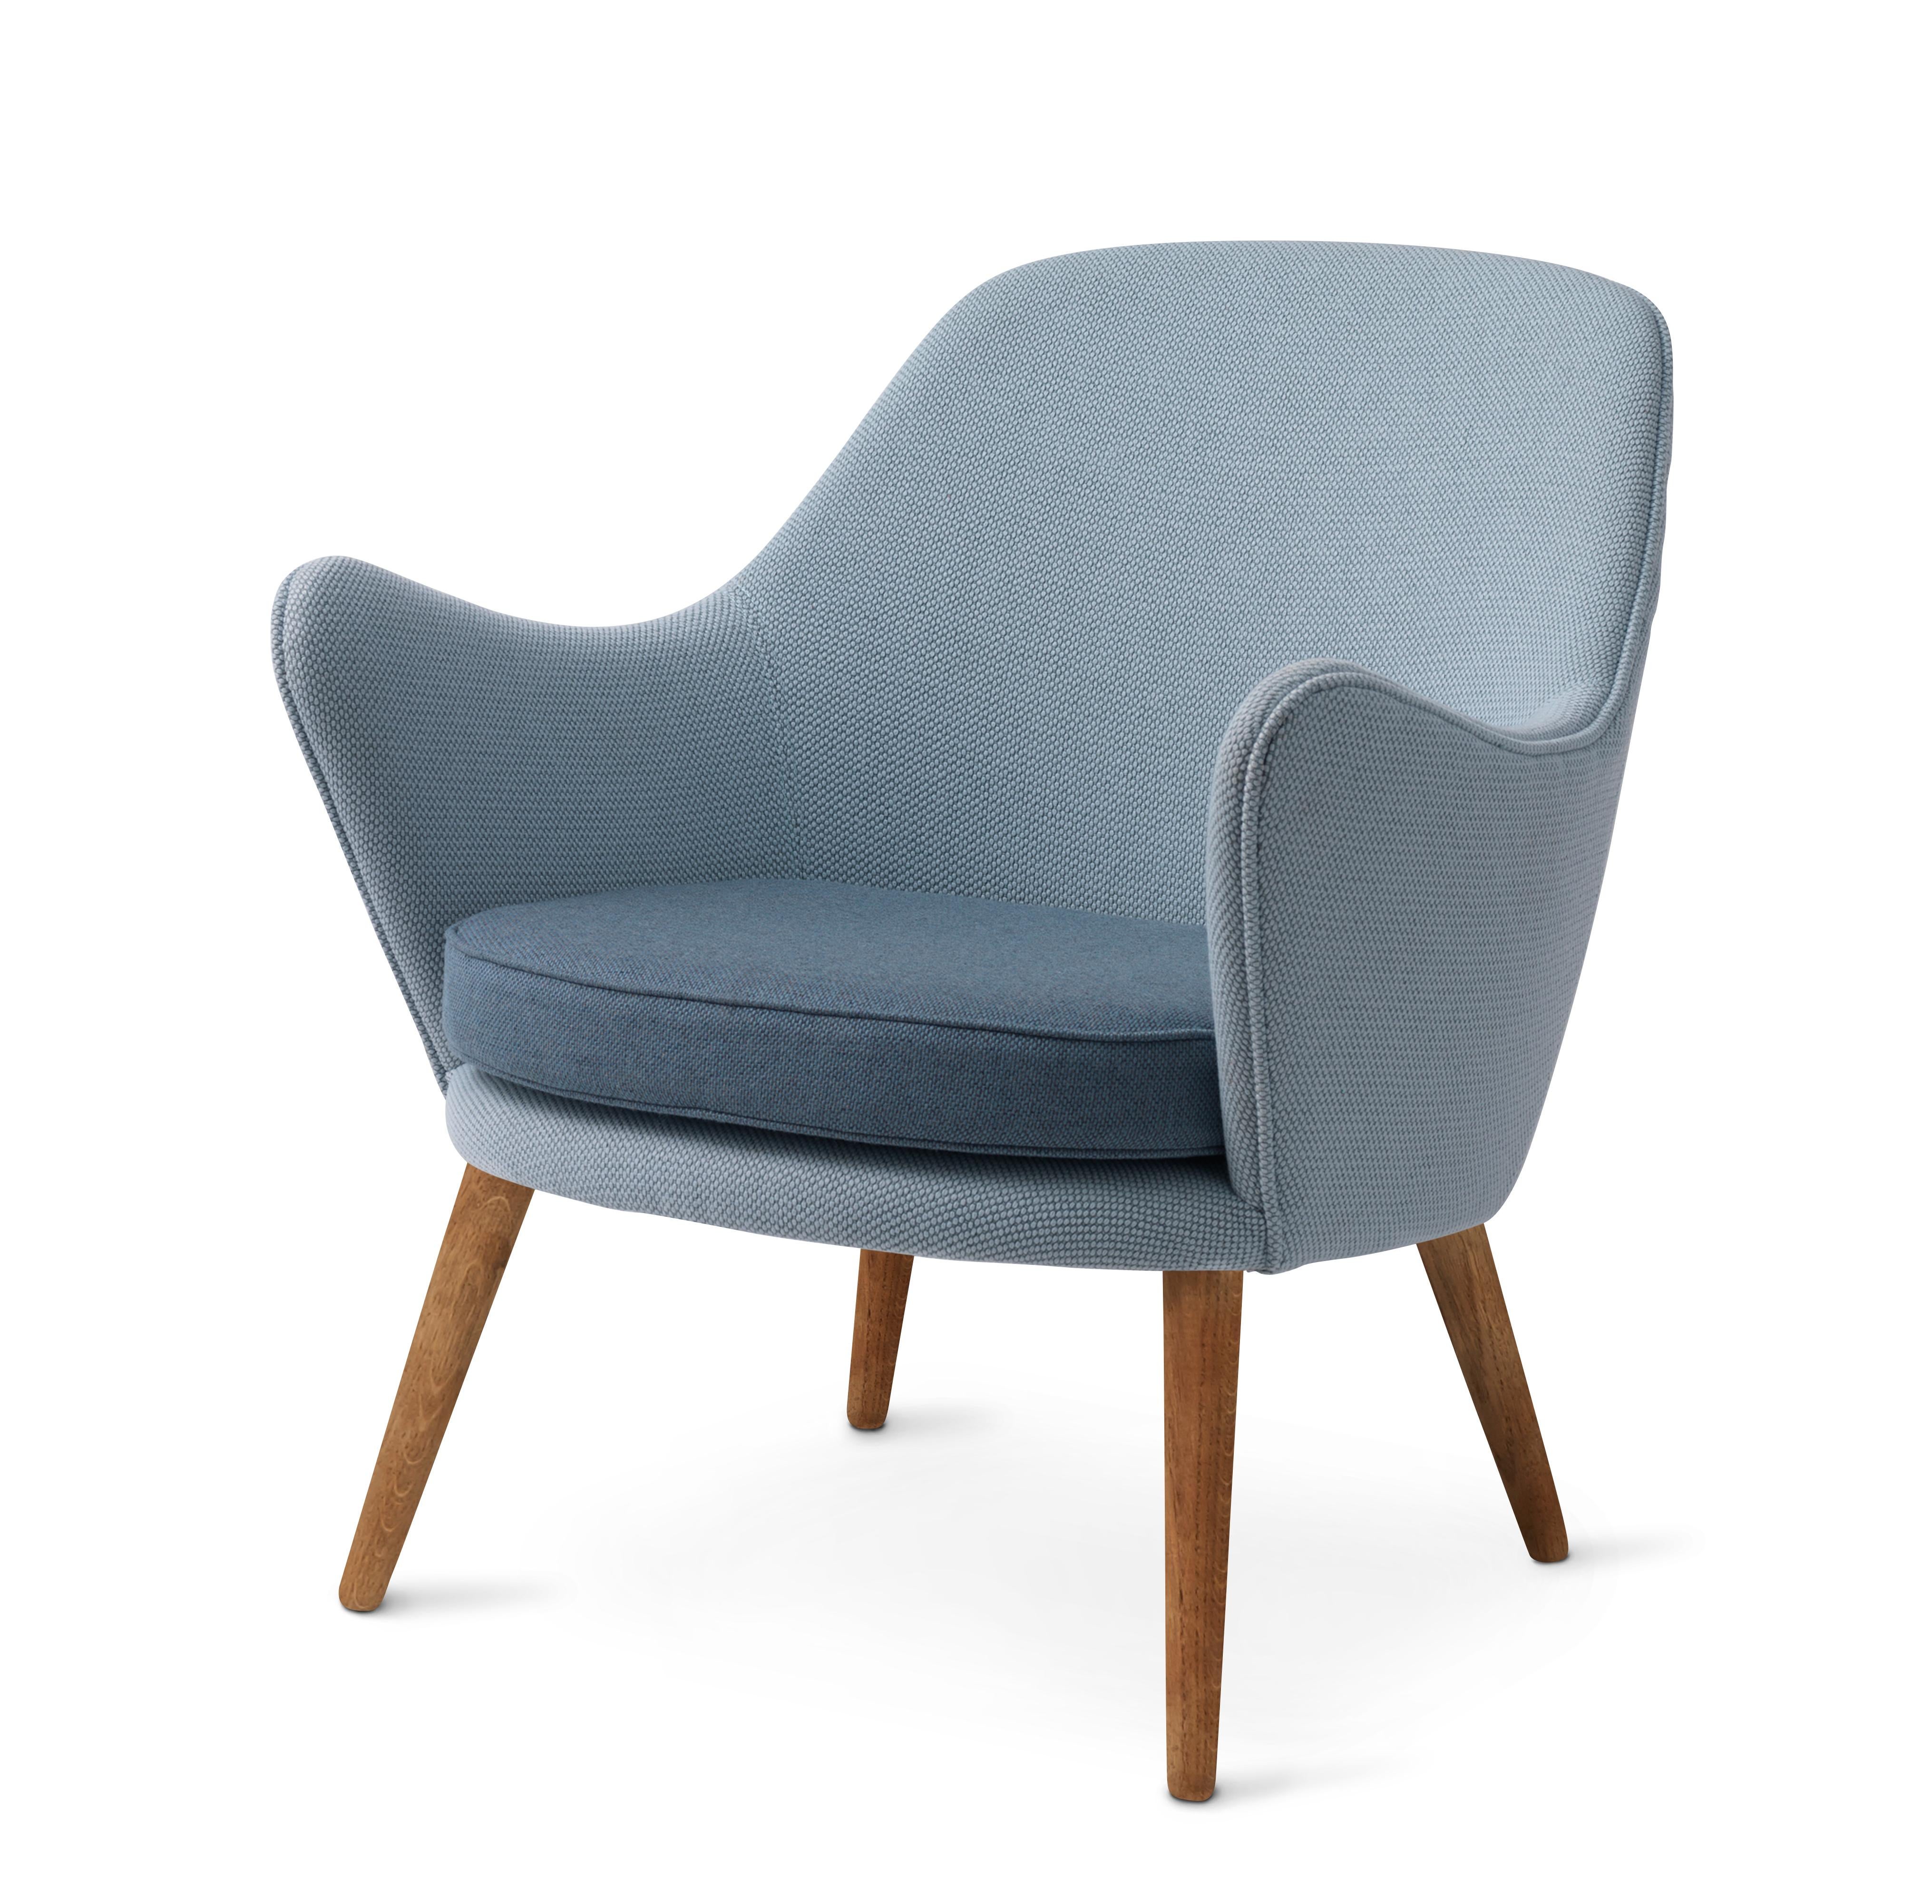 For Sale: Blue (Merit014/Rewool 768) Dwell Lounge Chair, by Hans Olsen from Warm Nordic 2